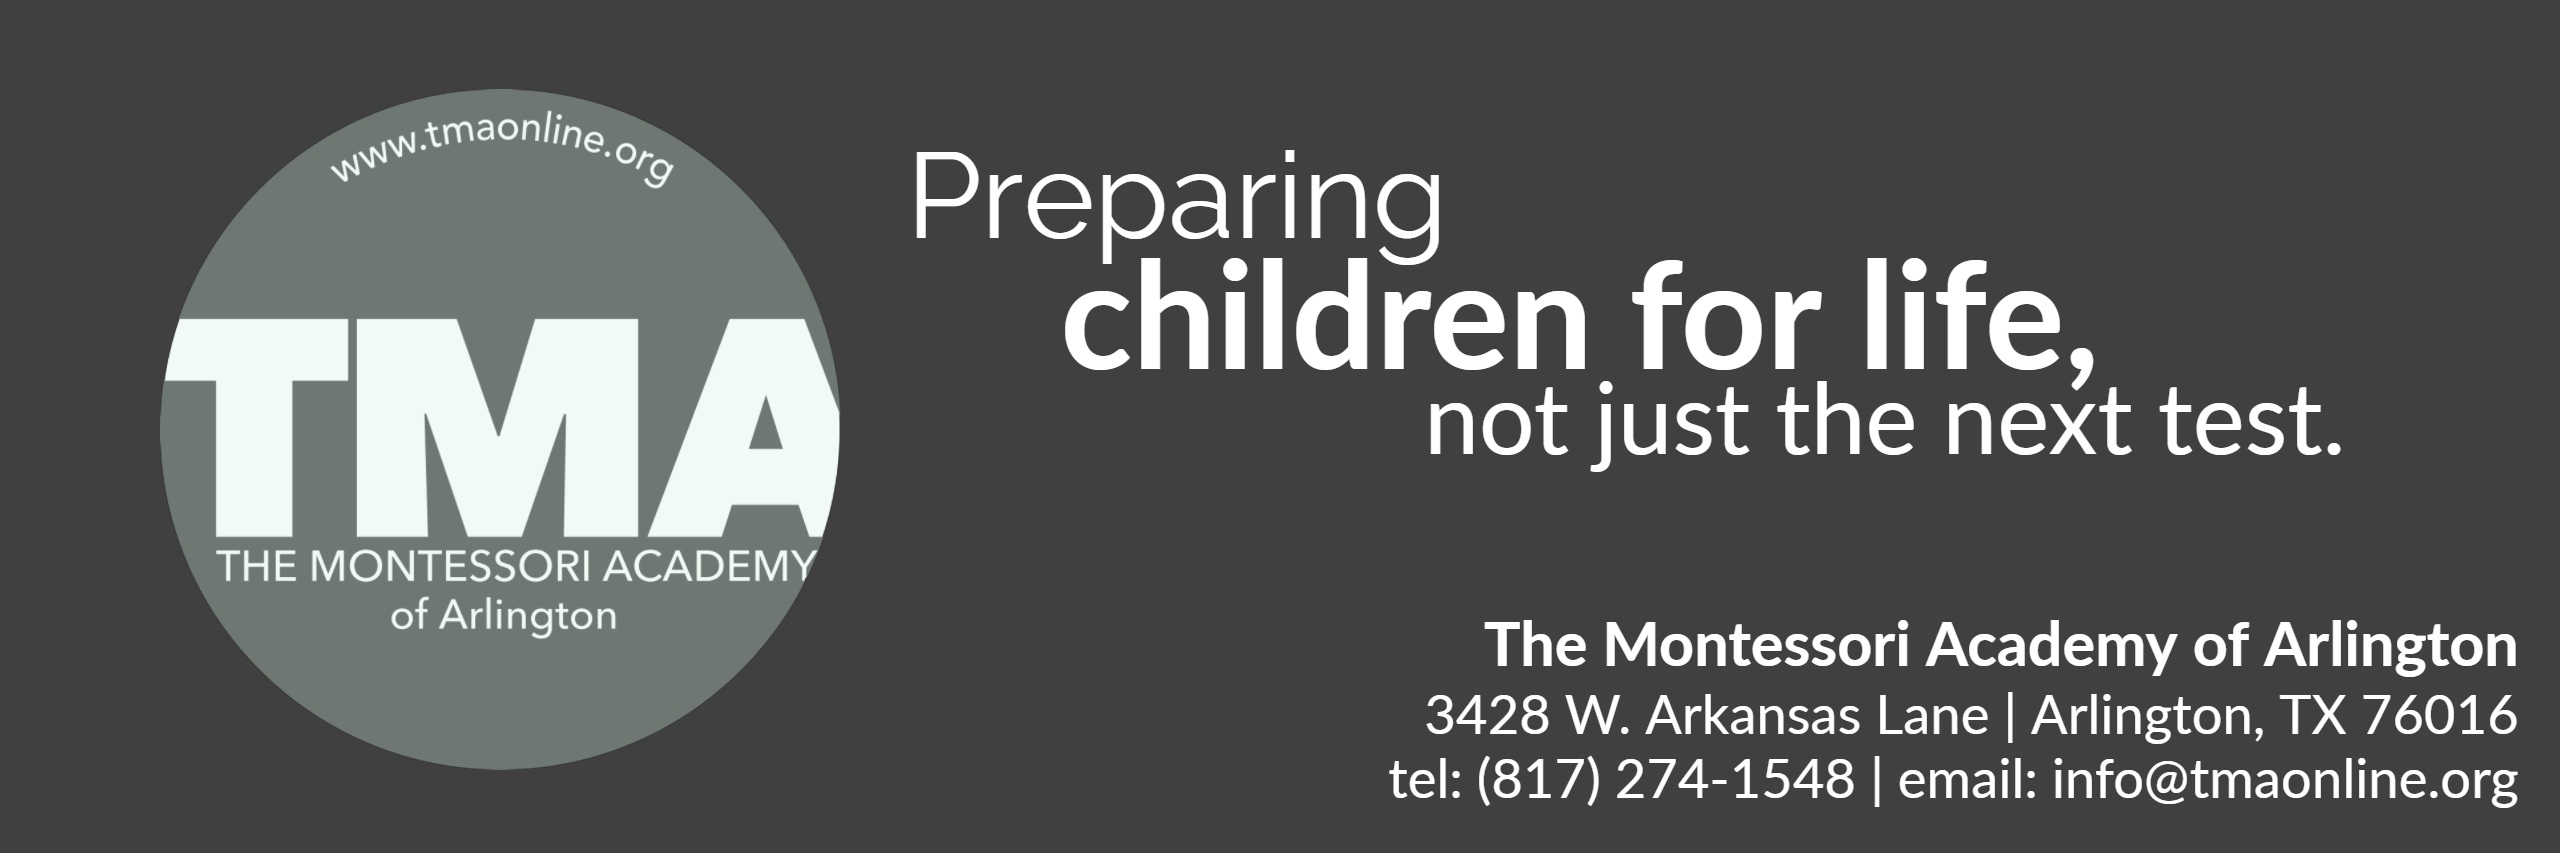 Preparing children for life, not just the next test. 